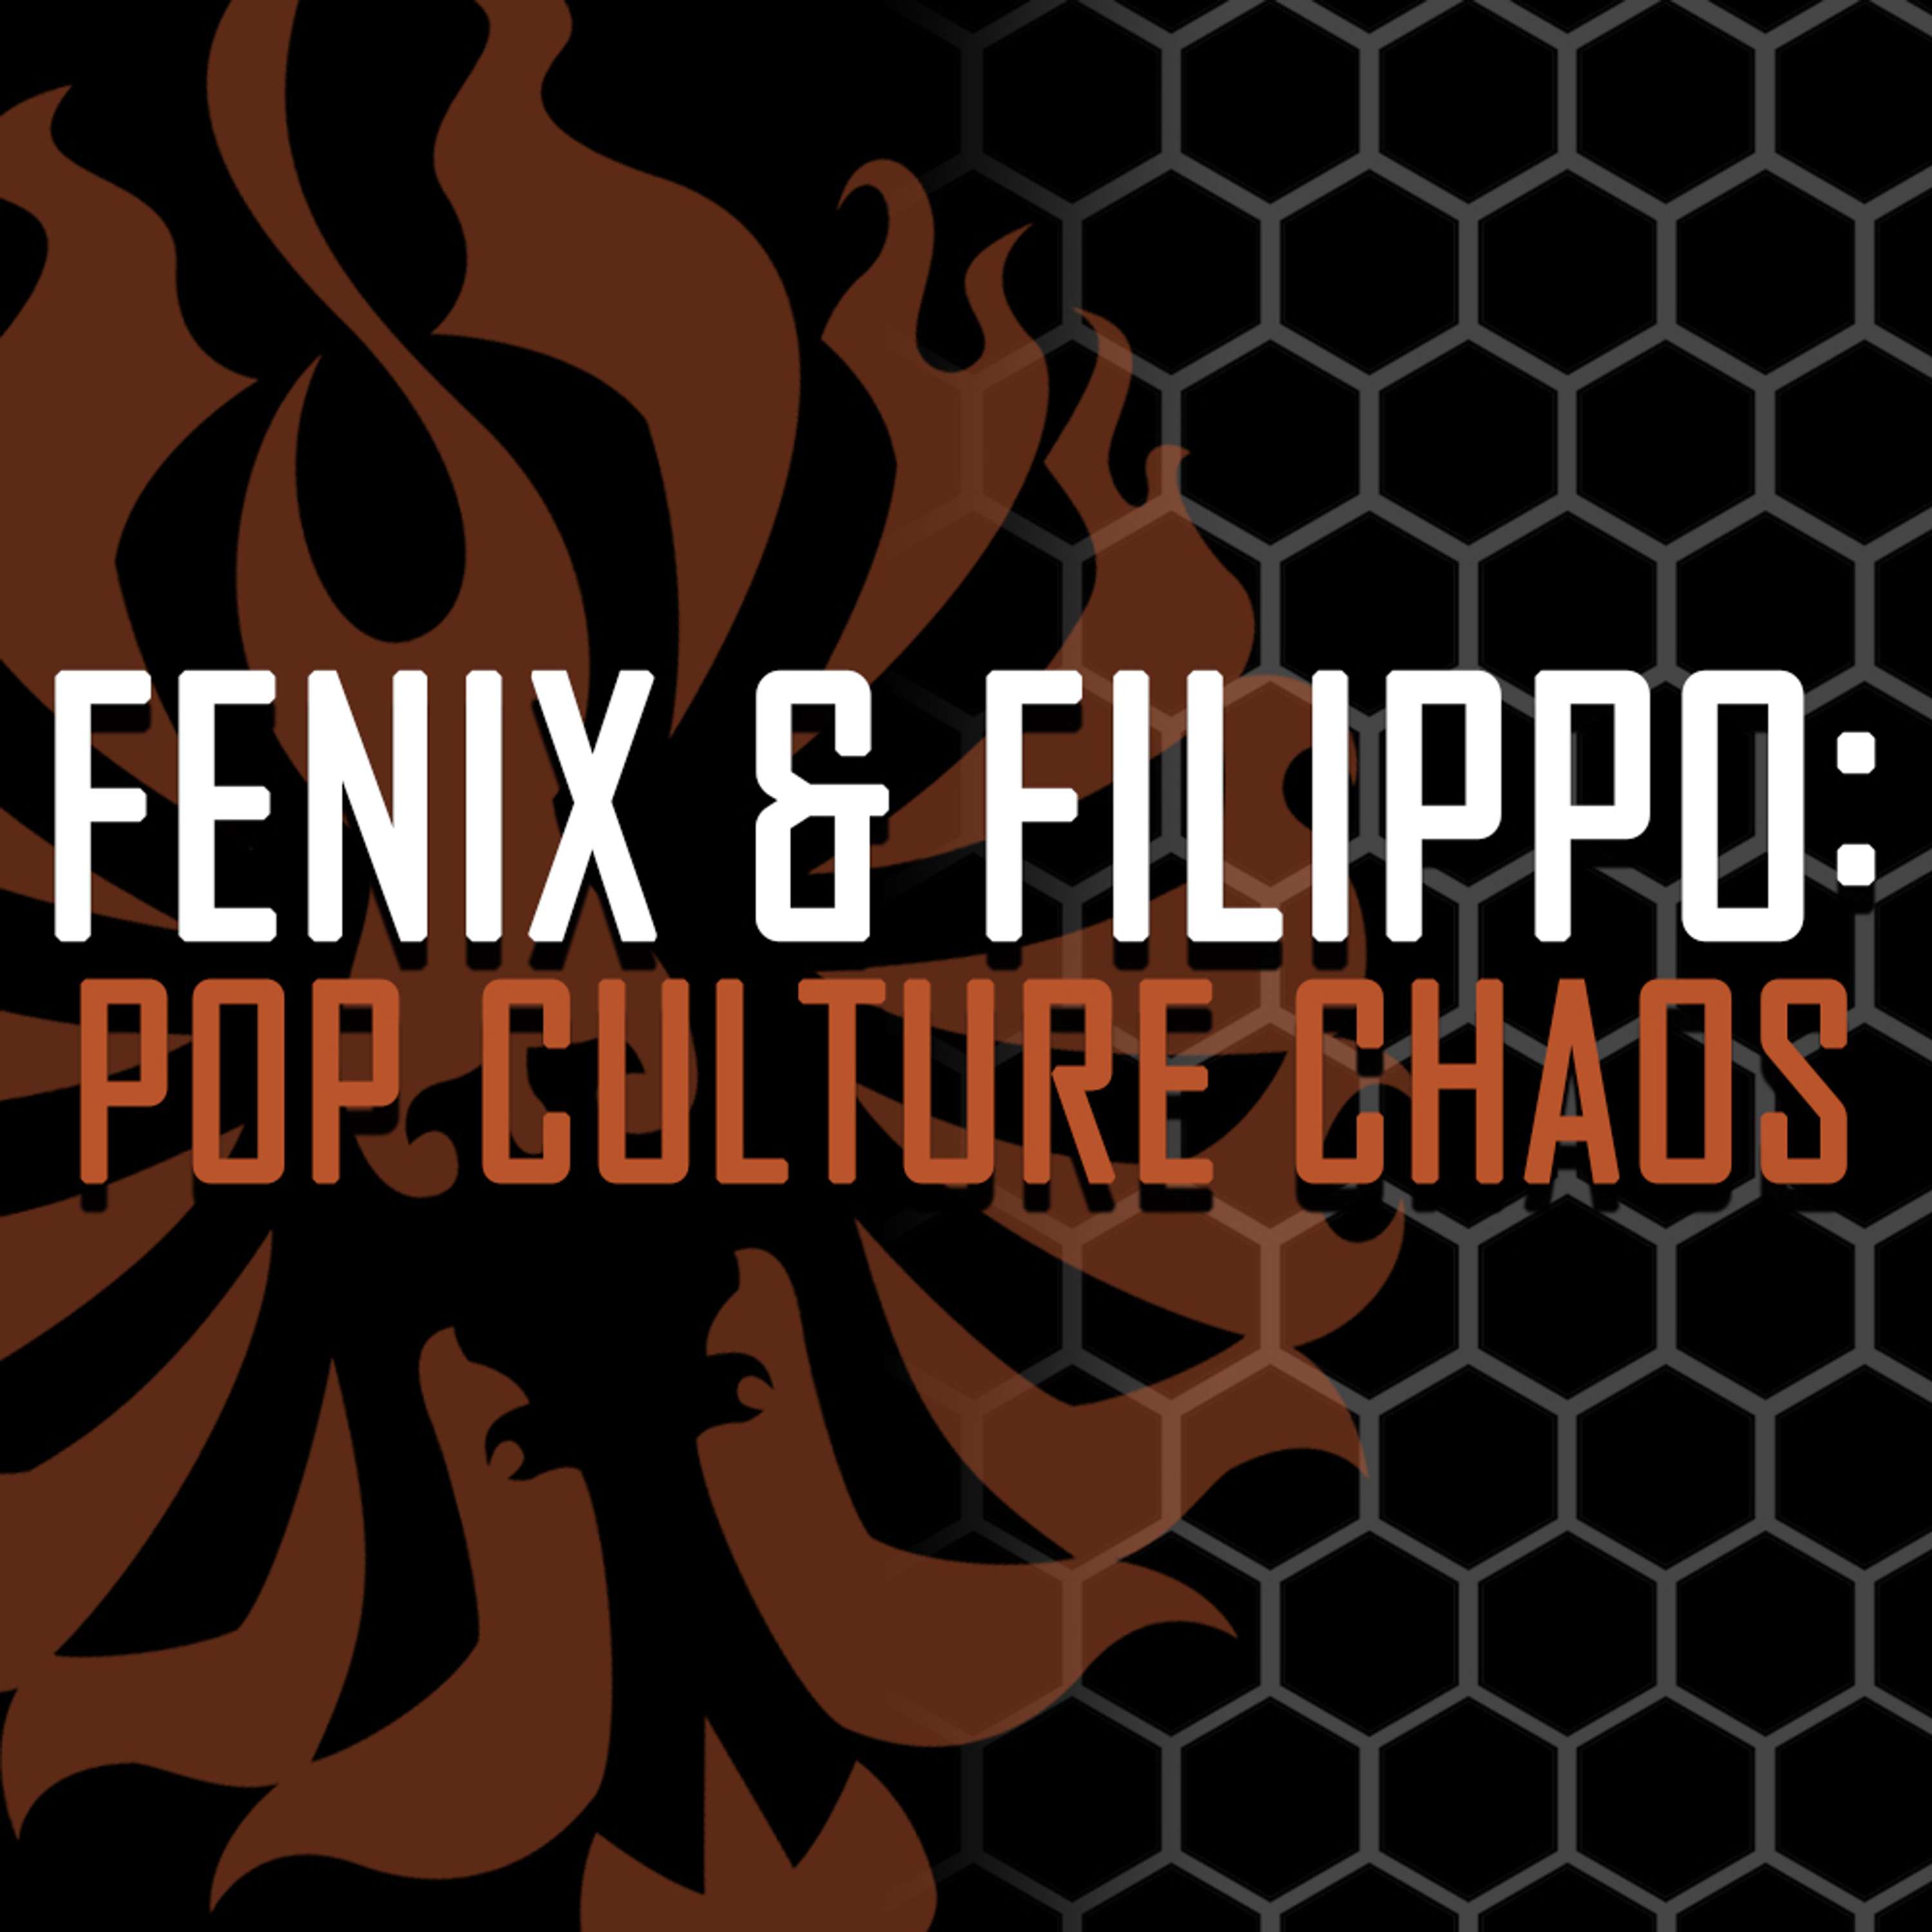 Fenix & Filippo: Pop Culture Chaos - Wednesday, September 15th 2021 with Nerd News, Gods Unchained & WarioWare: Get It Together! Reviews, TMNT: The Arcade Game, & Kollector Korner